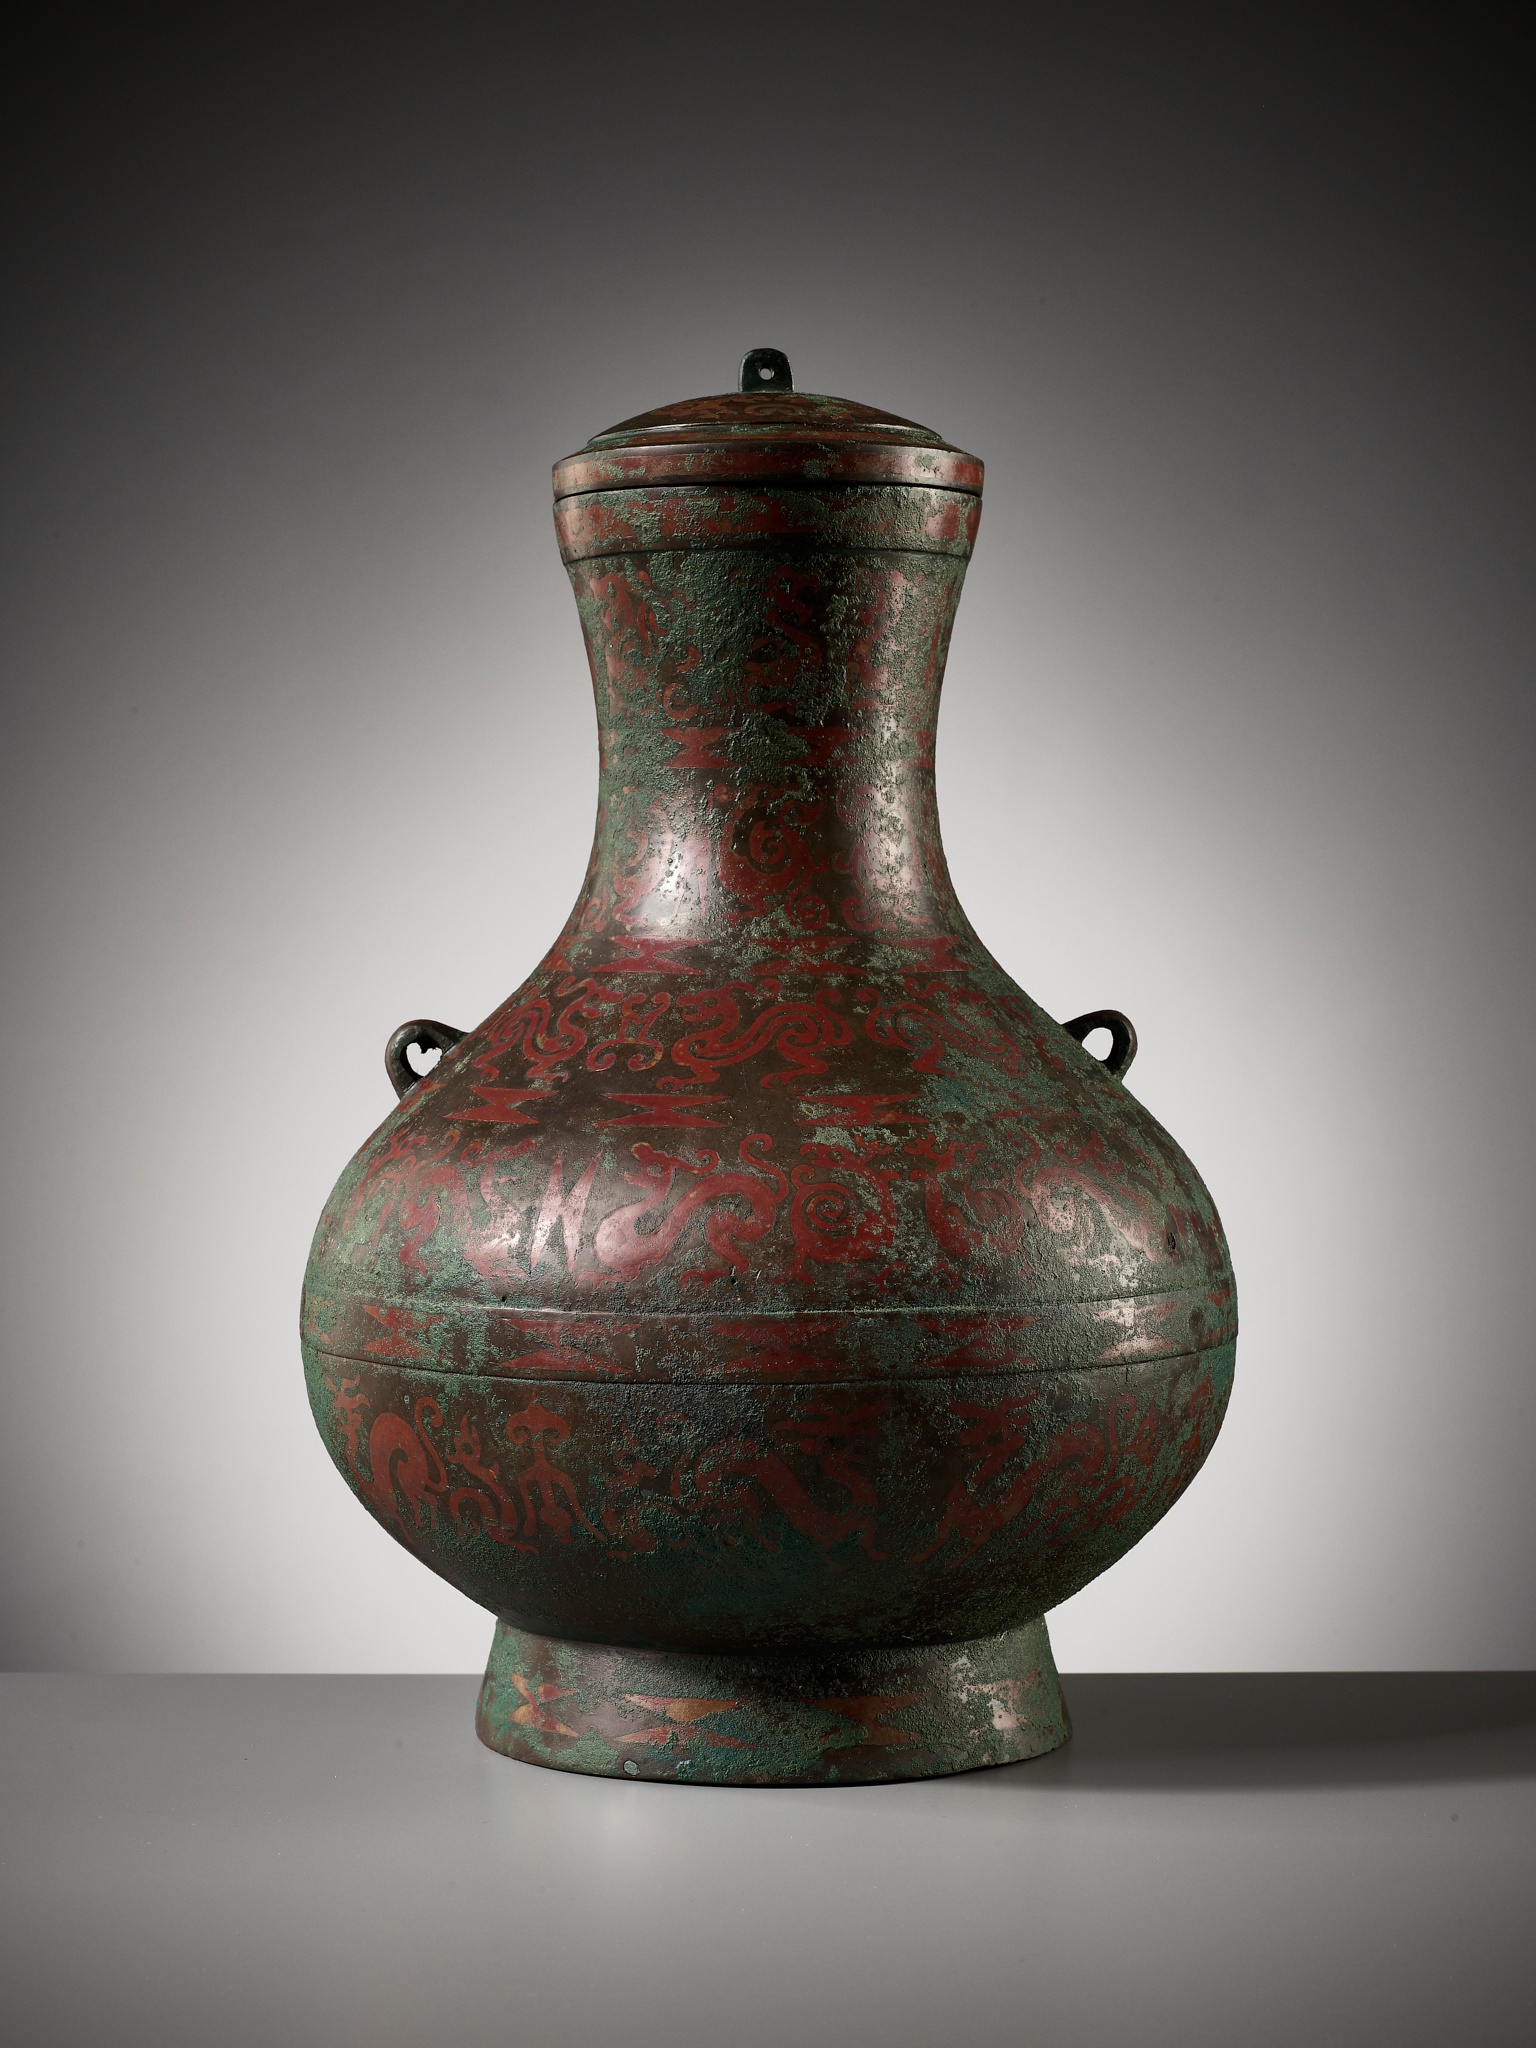 A COPPER-INLAID BRONZE RITUAL WINE VESSEL AND COVER, HU, EASTERN ZHOU DYNASTY - Image 16 of 27